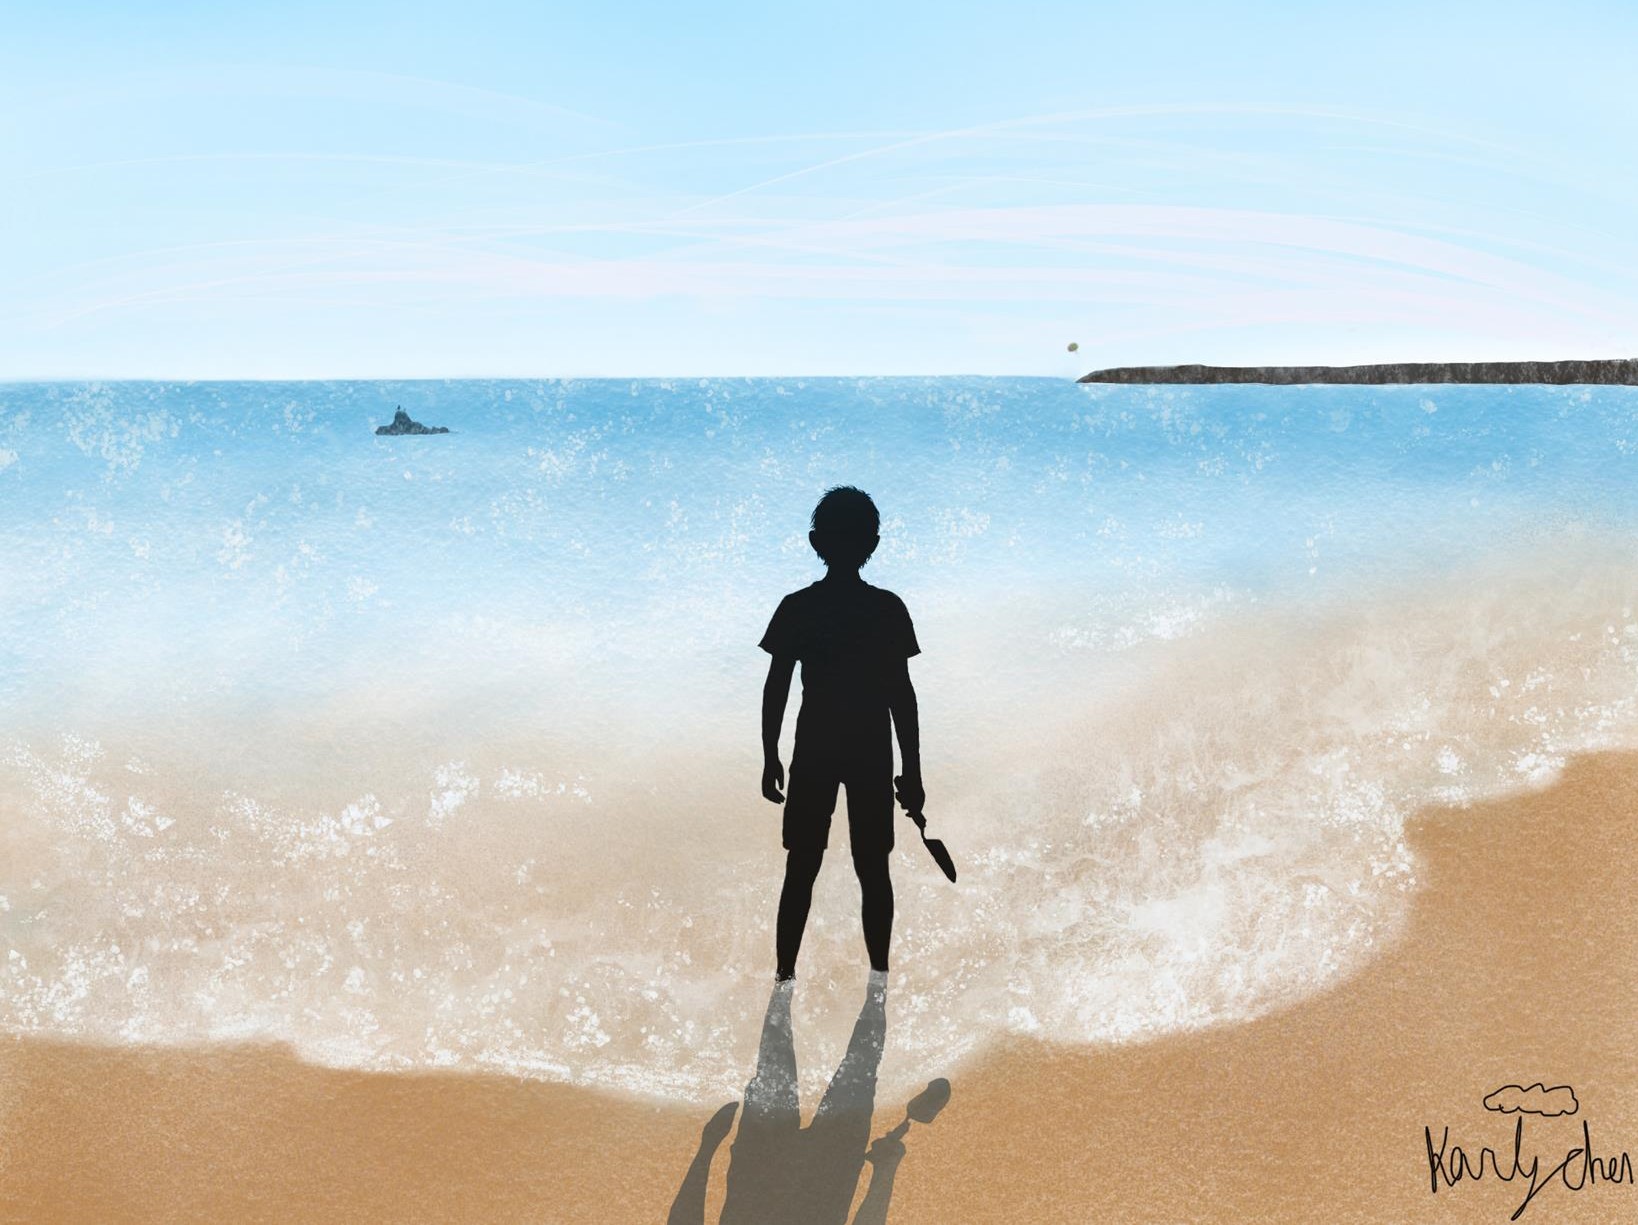 a silhouette of a child holding a sand shovel, looking away from us, out at a still ocean